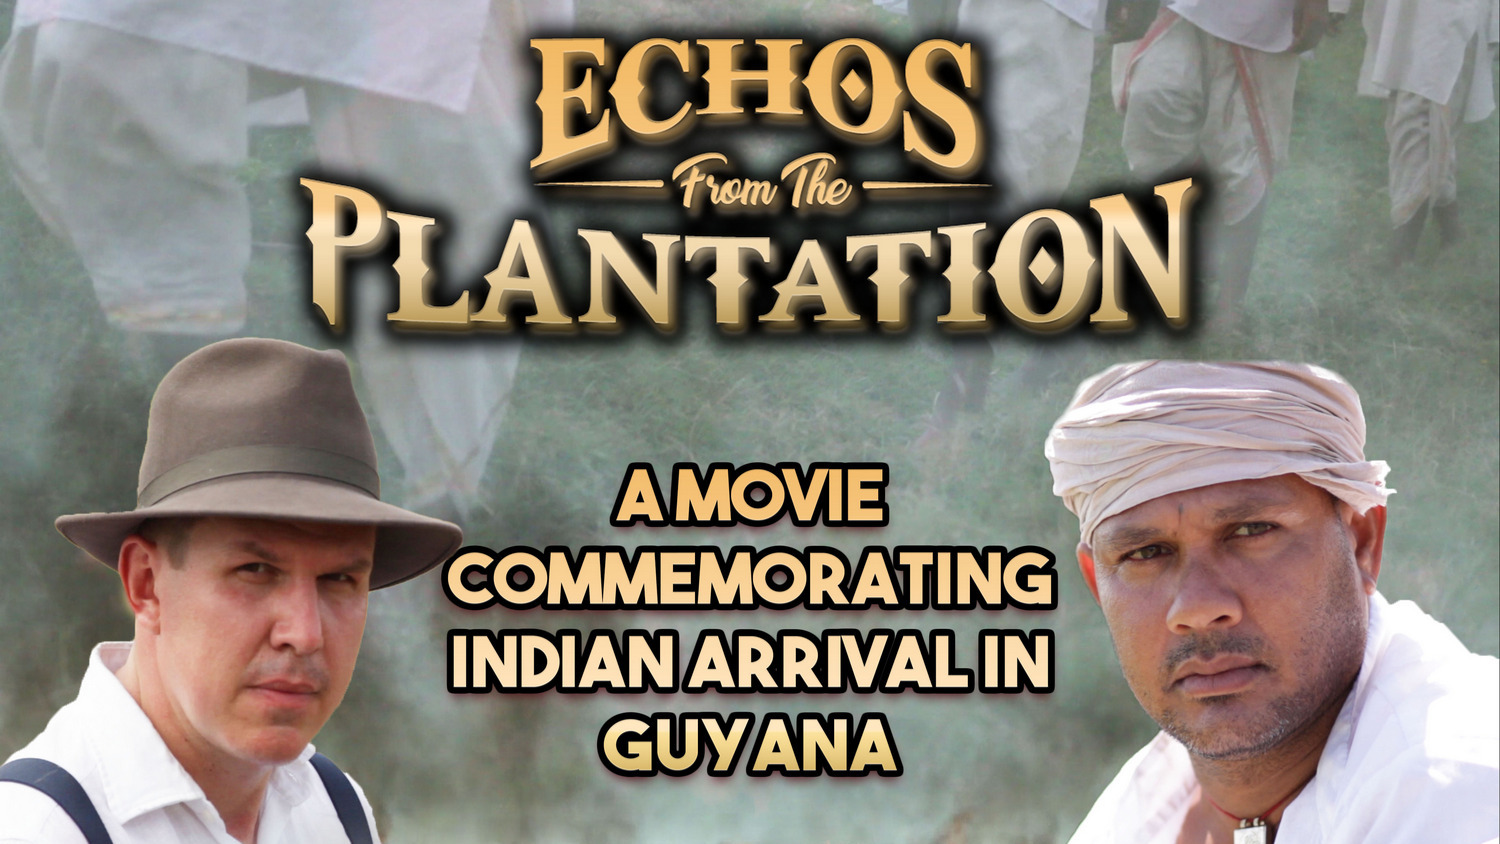 Echos from the Plantation Movie Poster